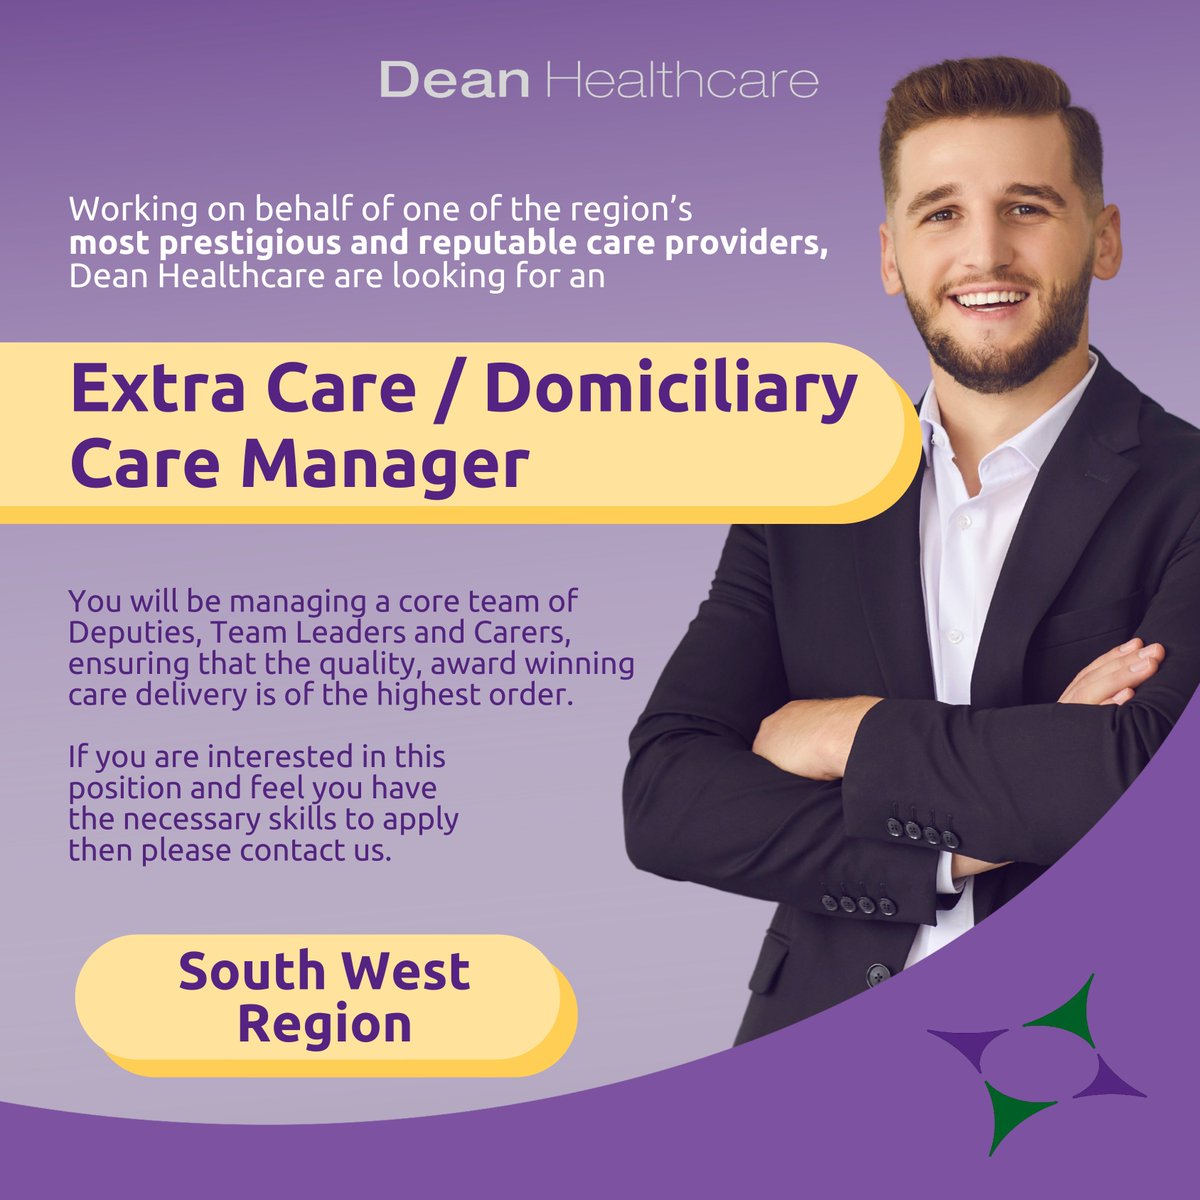 Working on behalf of one of the region's most prestigious and reputable care providers, Dean Healthcare are looking for an exceptional Extra Care / Domiciliary Care Manager in the South West region.

#extracare #domiciliarycare #caremanager #healthcare #healthcareprofessionals